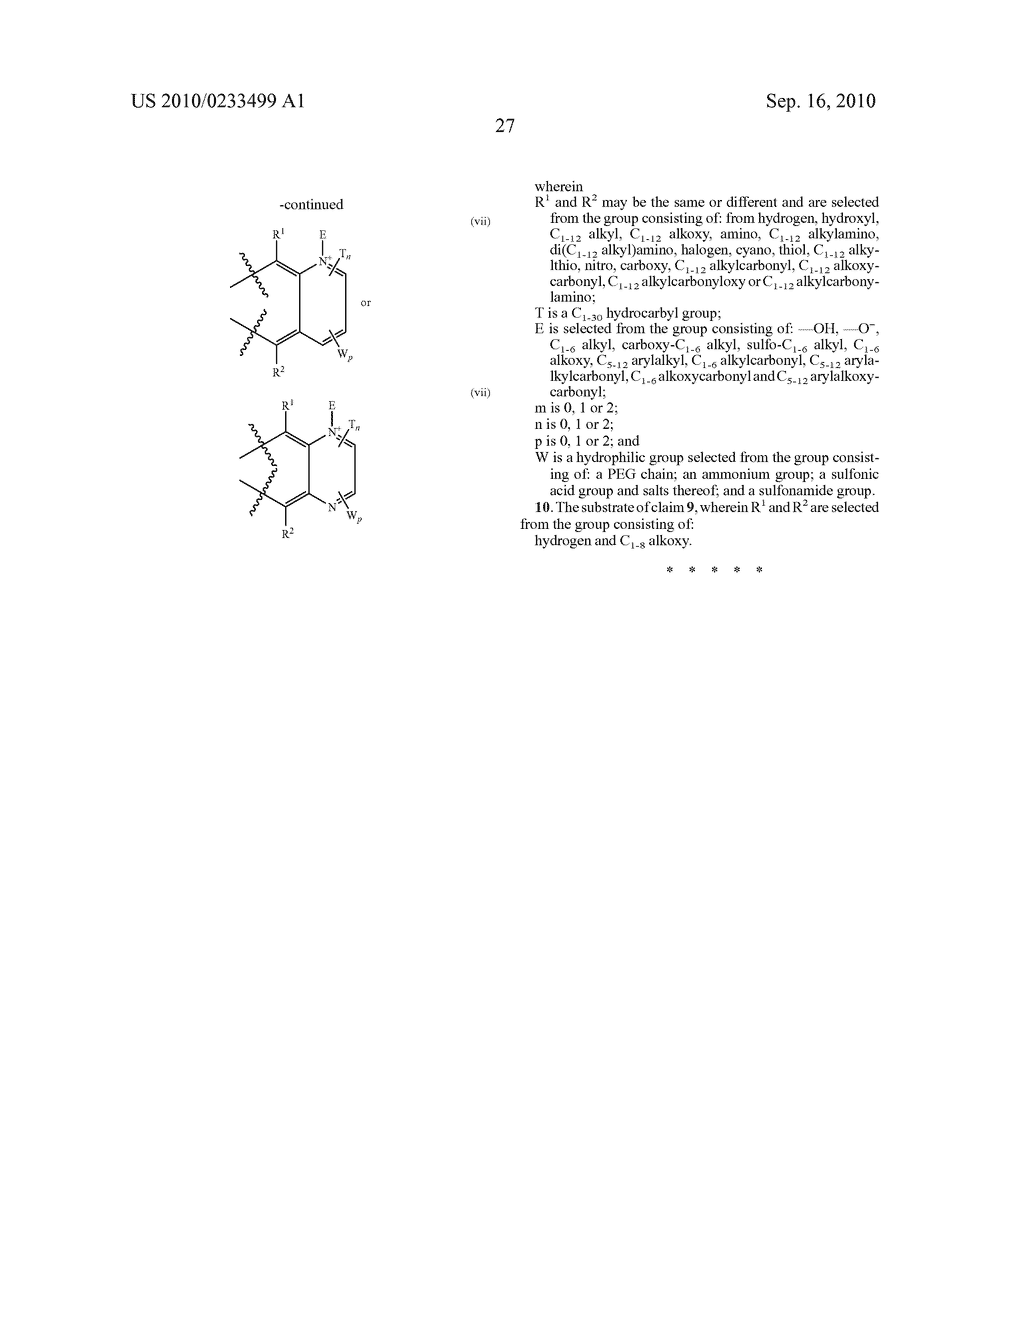 SUBSTRATE HAVING IR-ABSORBING DYE WITH BRANCHED AXIAL LIGANDS - diagram, schematic, and image 55